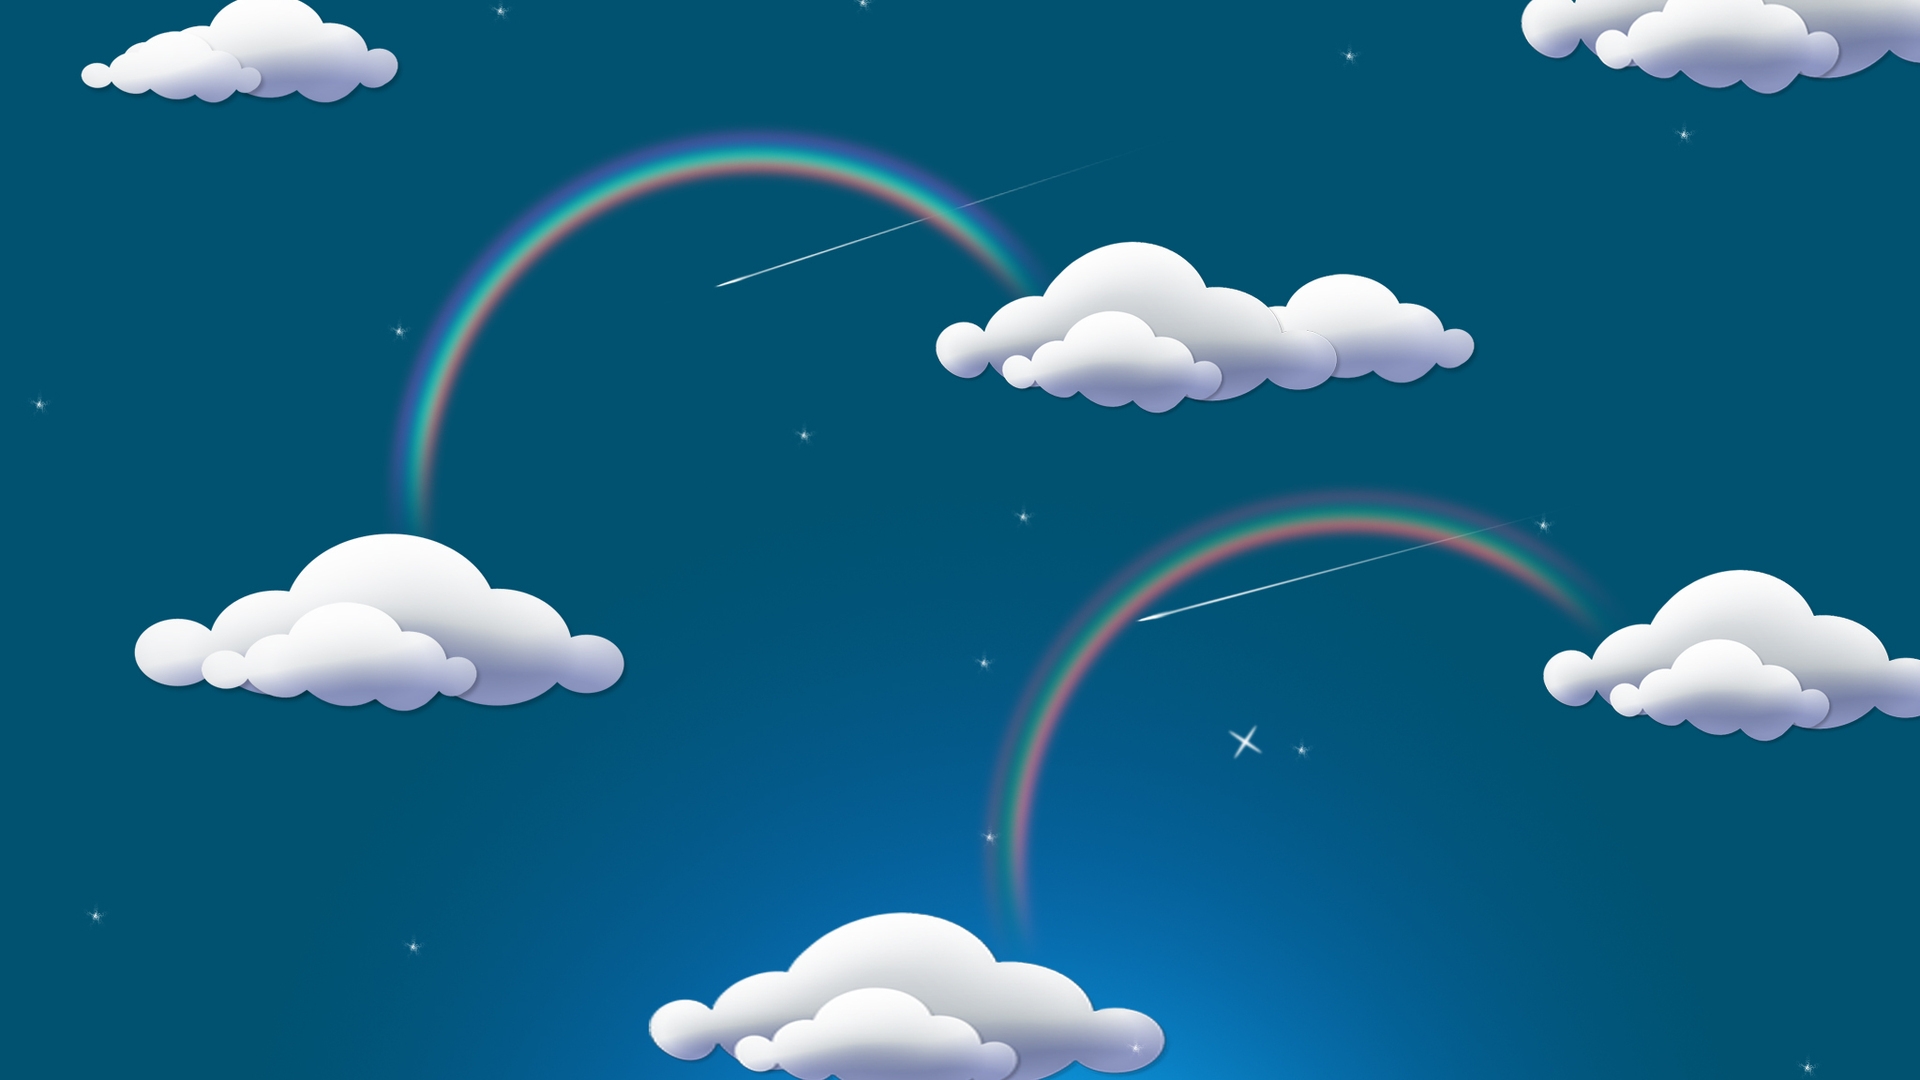 Rainbow and Clouds for 1920 x 1080 HDTV 1080p resolution